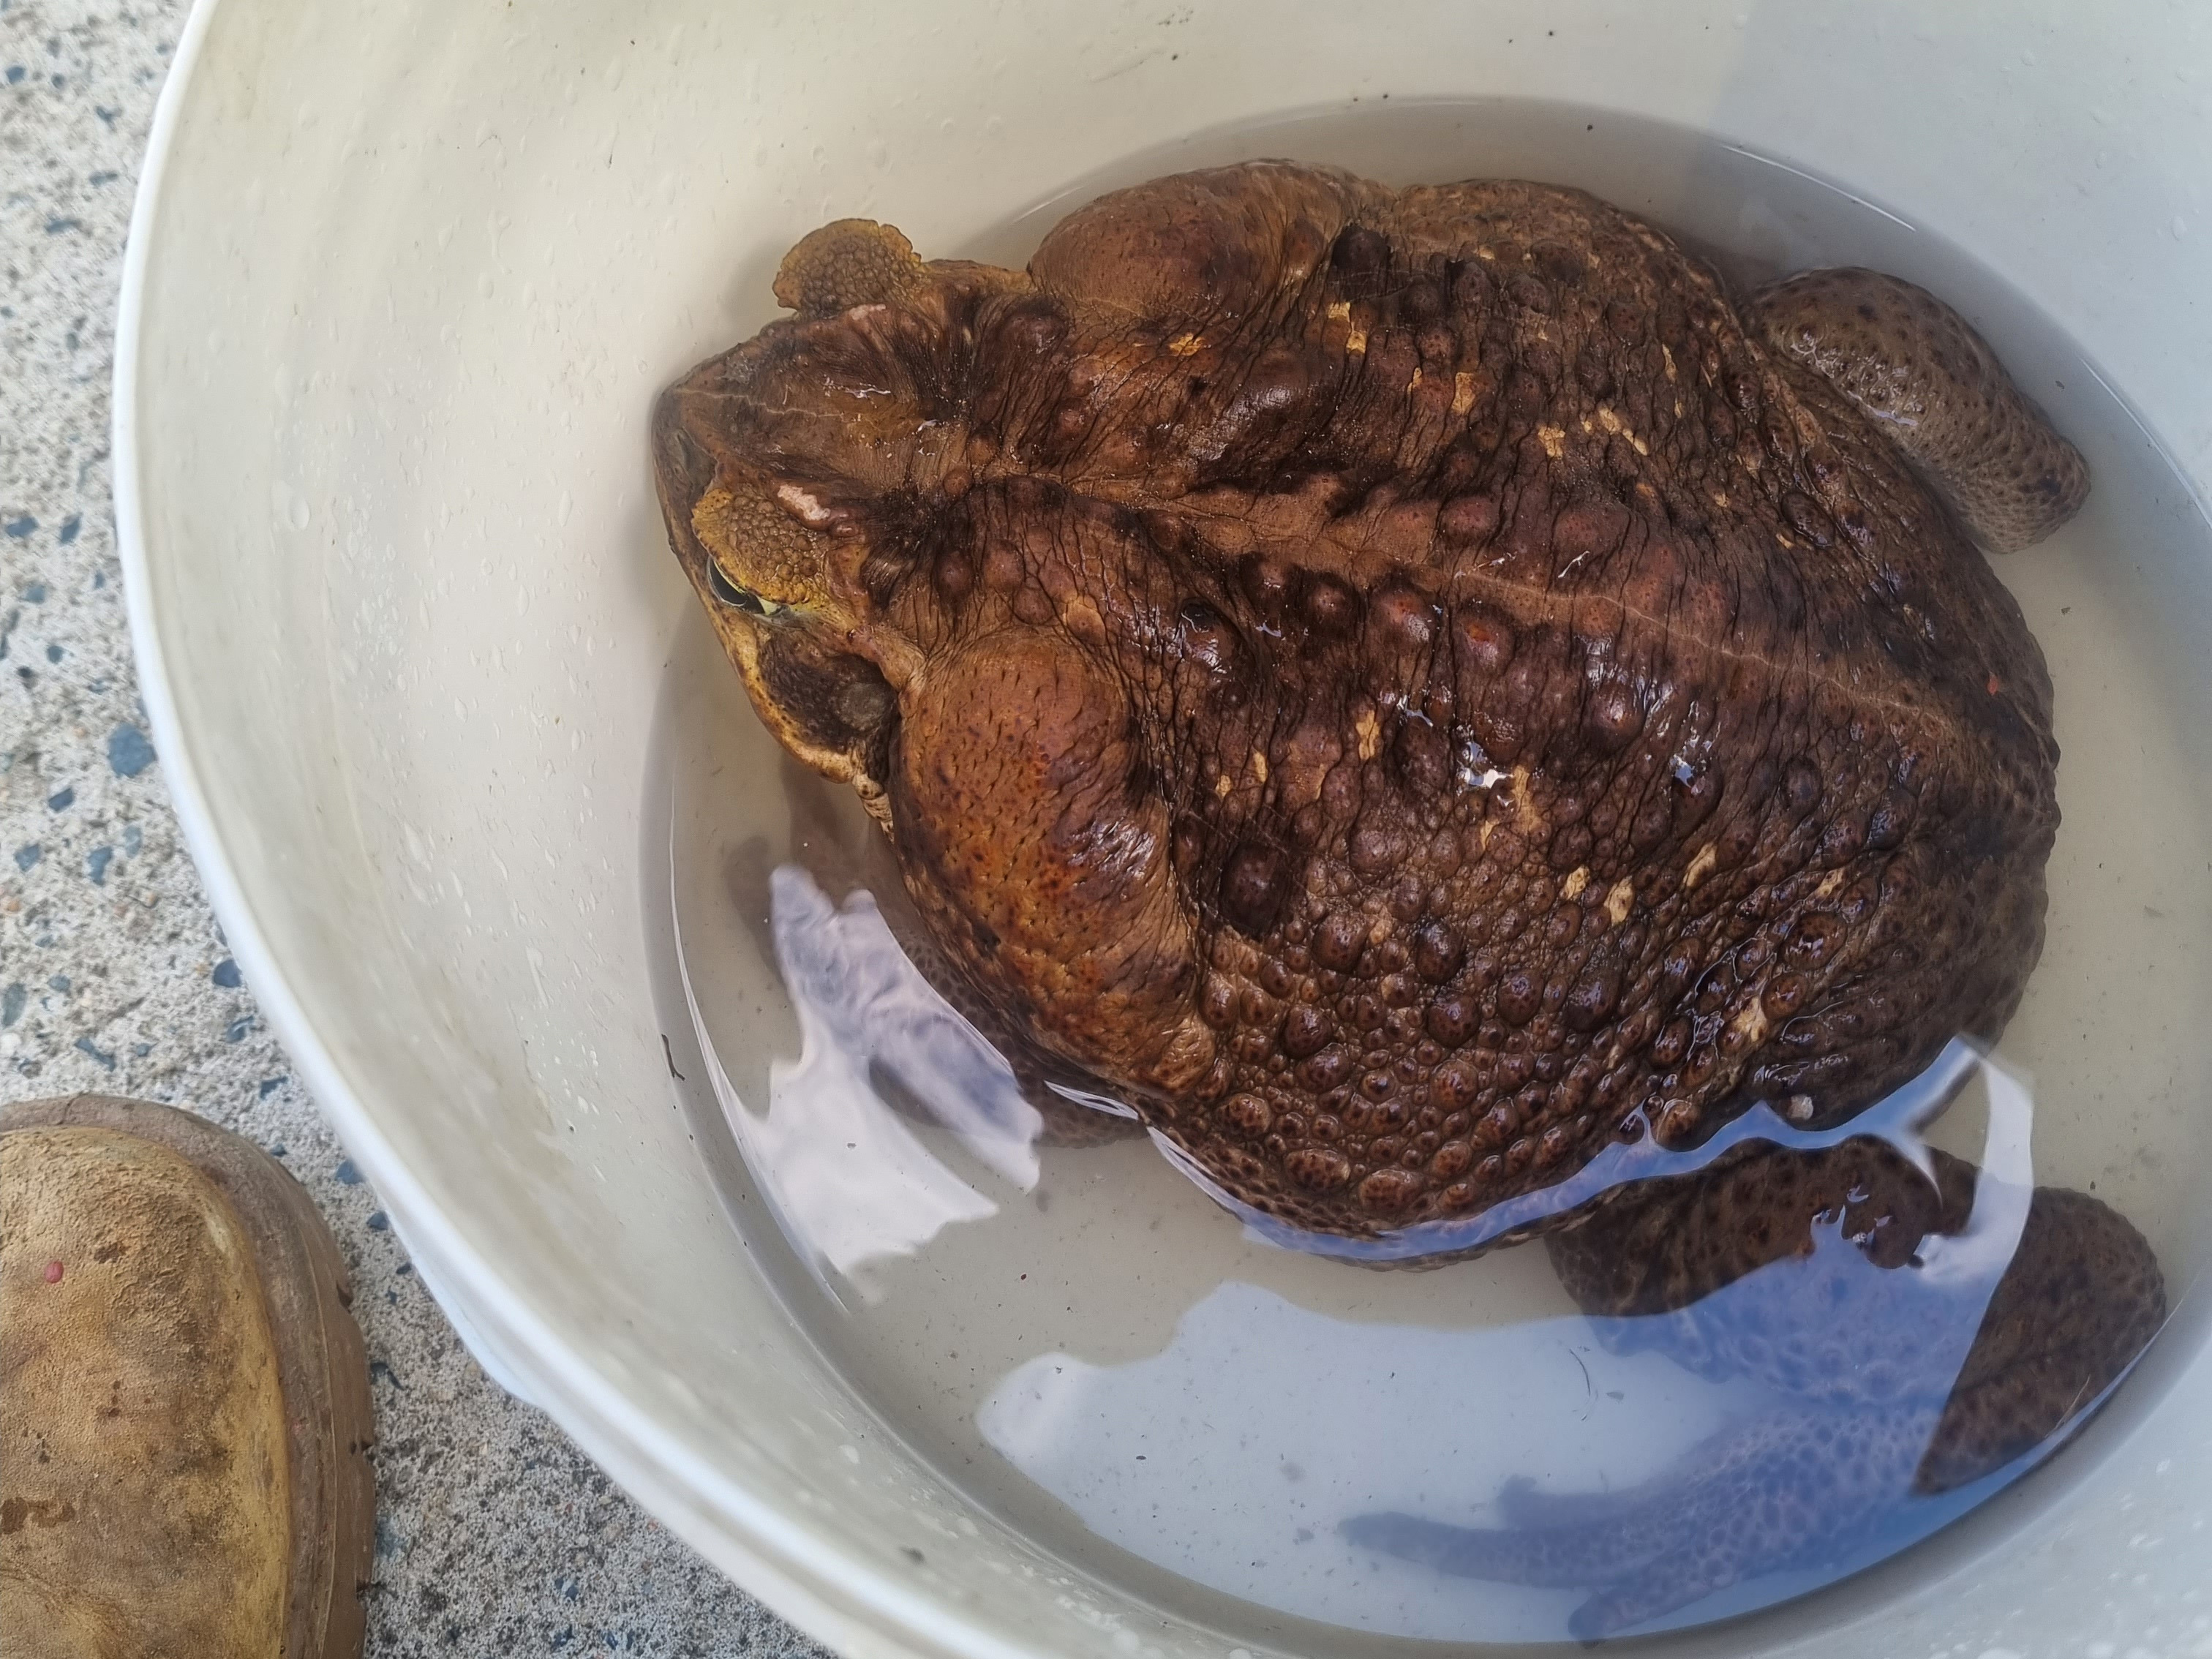 A cane toad so huge it was nicknamed 'Toadzilla' has been found in Queensland.The mammoth creature weighed almost 3kg - almost as much as a brick.